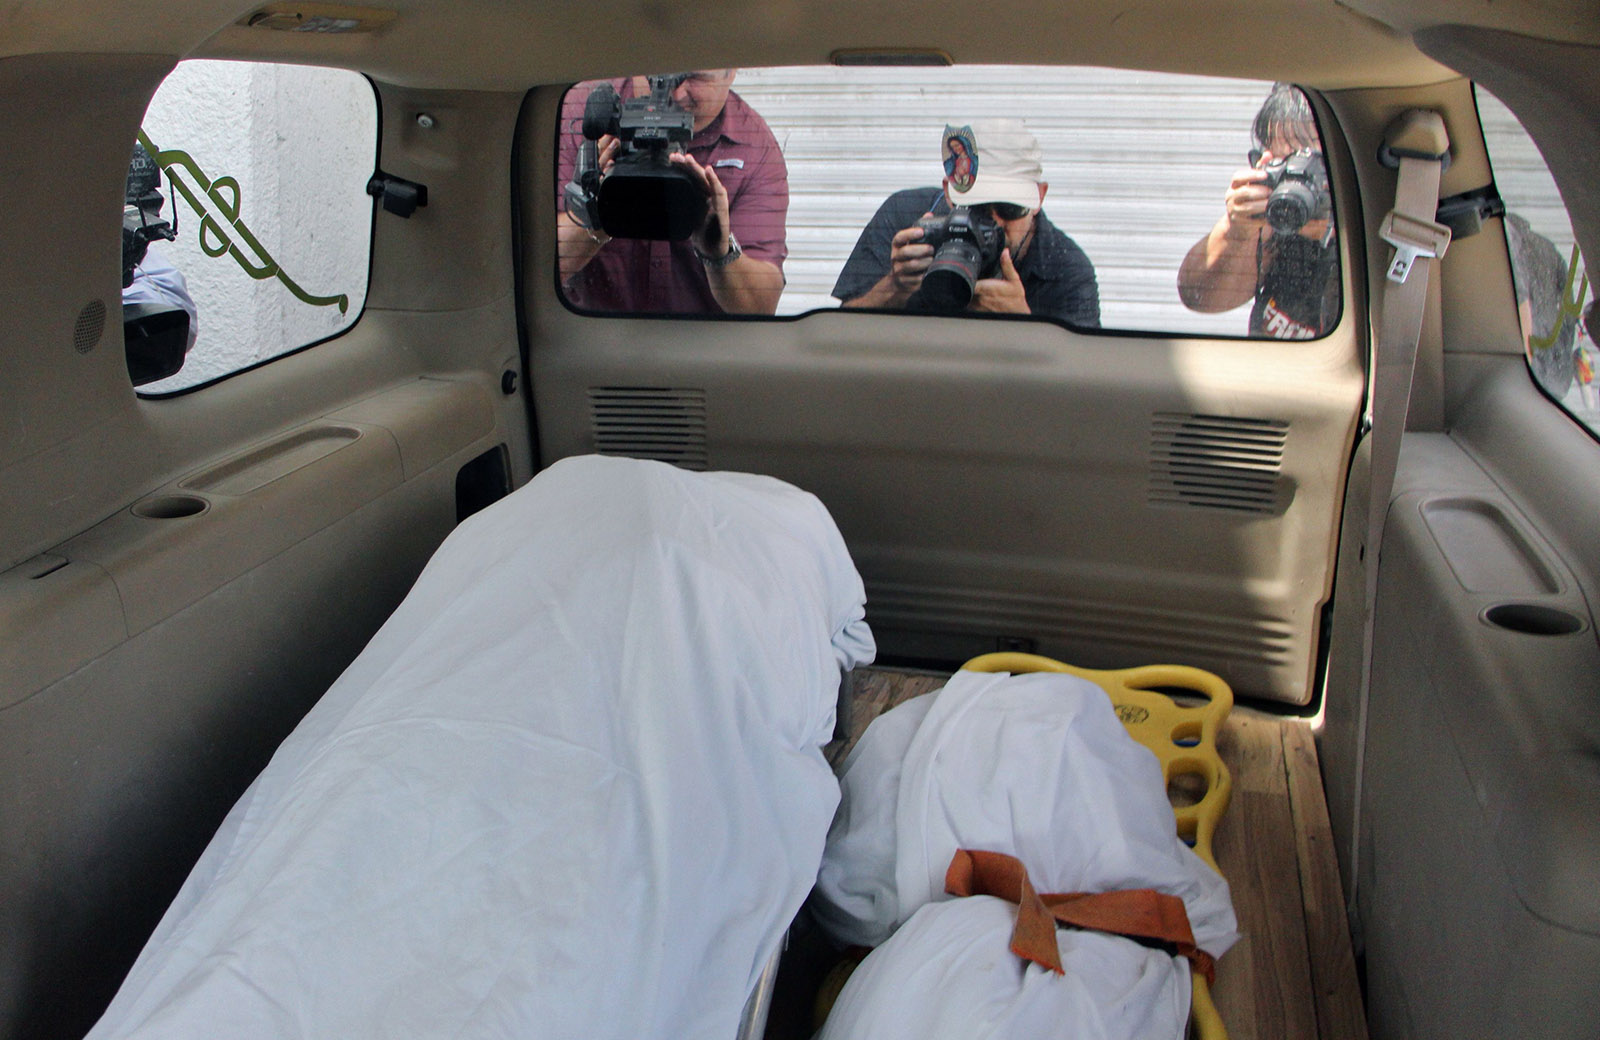 The recovered bodies of Óscar Alberto Martínez Ramírez and his daughter Valeria, who drowned crossing the Rio Grande, being transported to the forensic service in Matamoros, Mexico, June 26, 2019